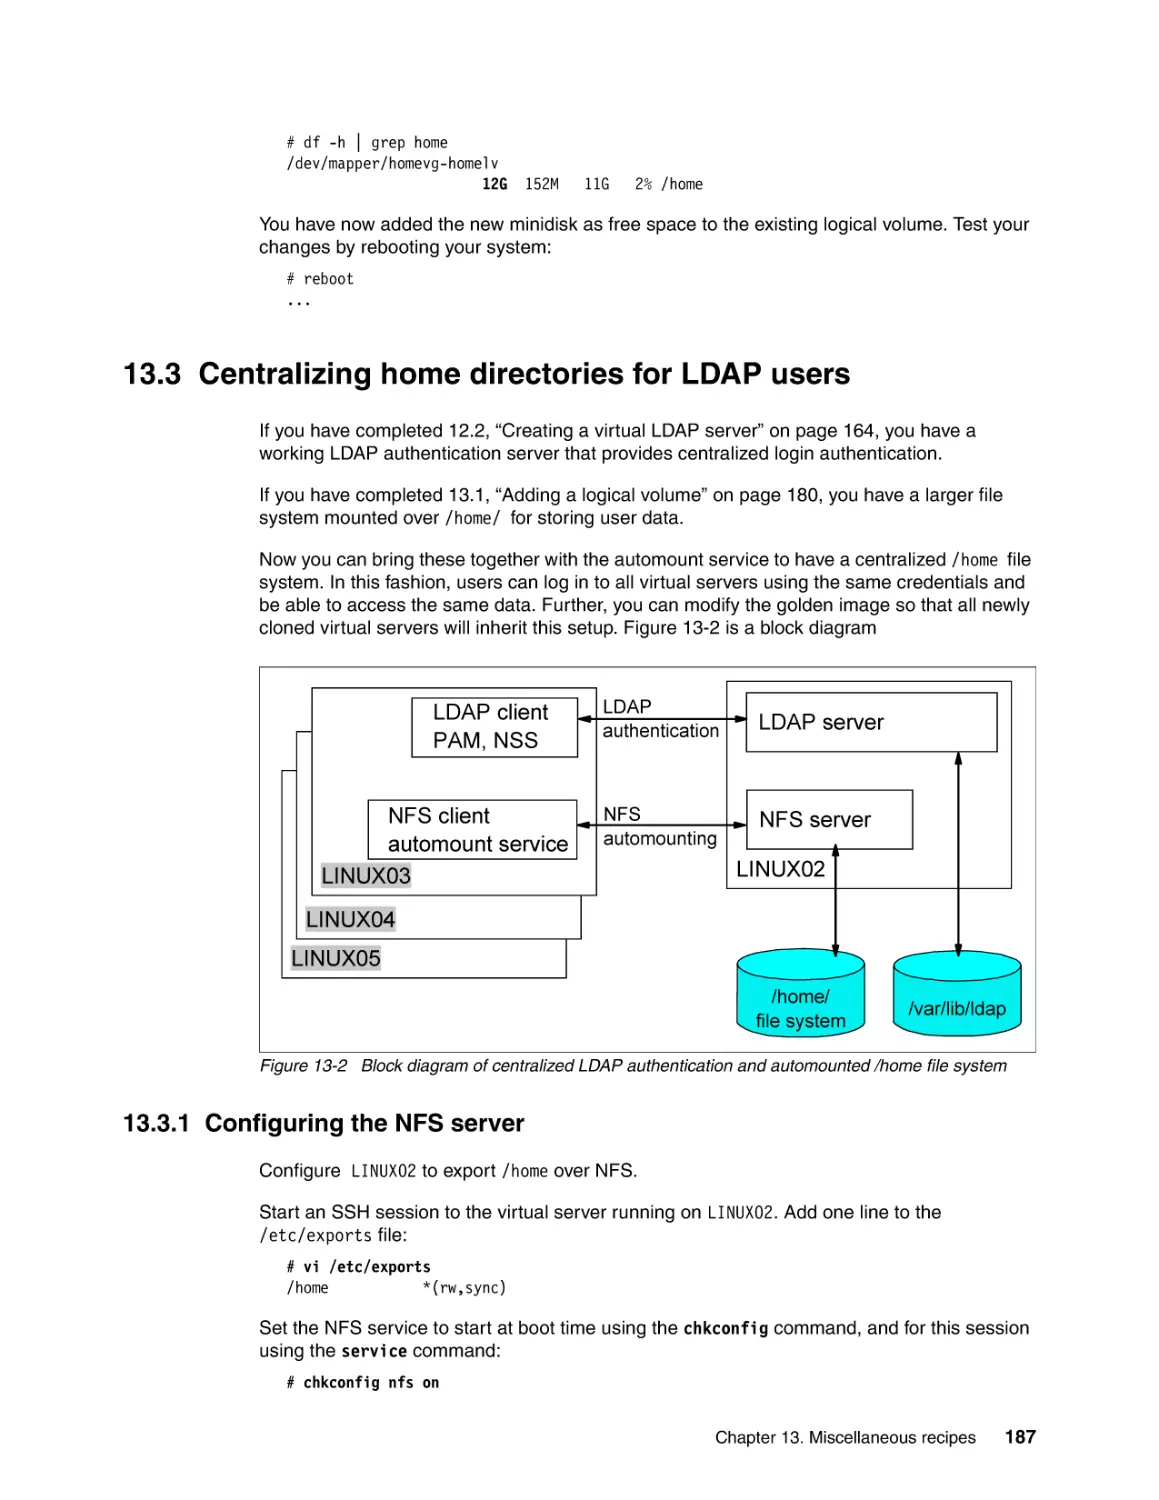 13.3 Centralizing home directories for LDAP users
13.3.1 Configuring the NFS server